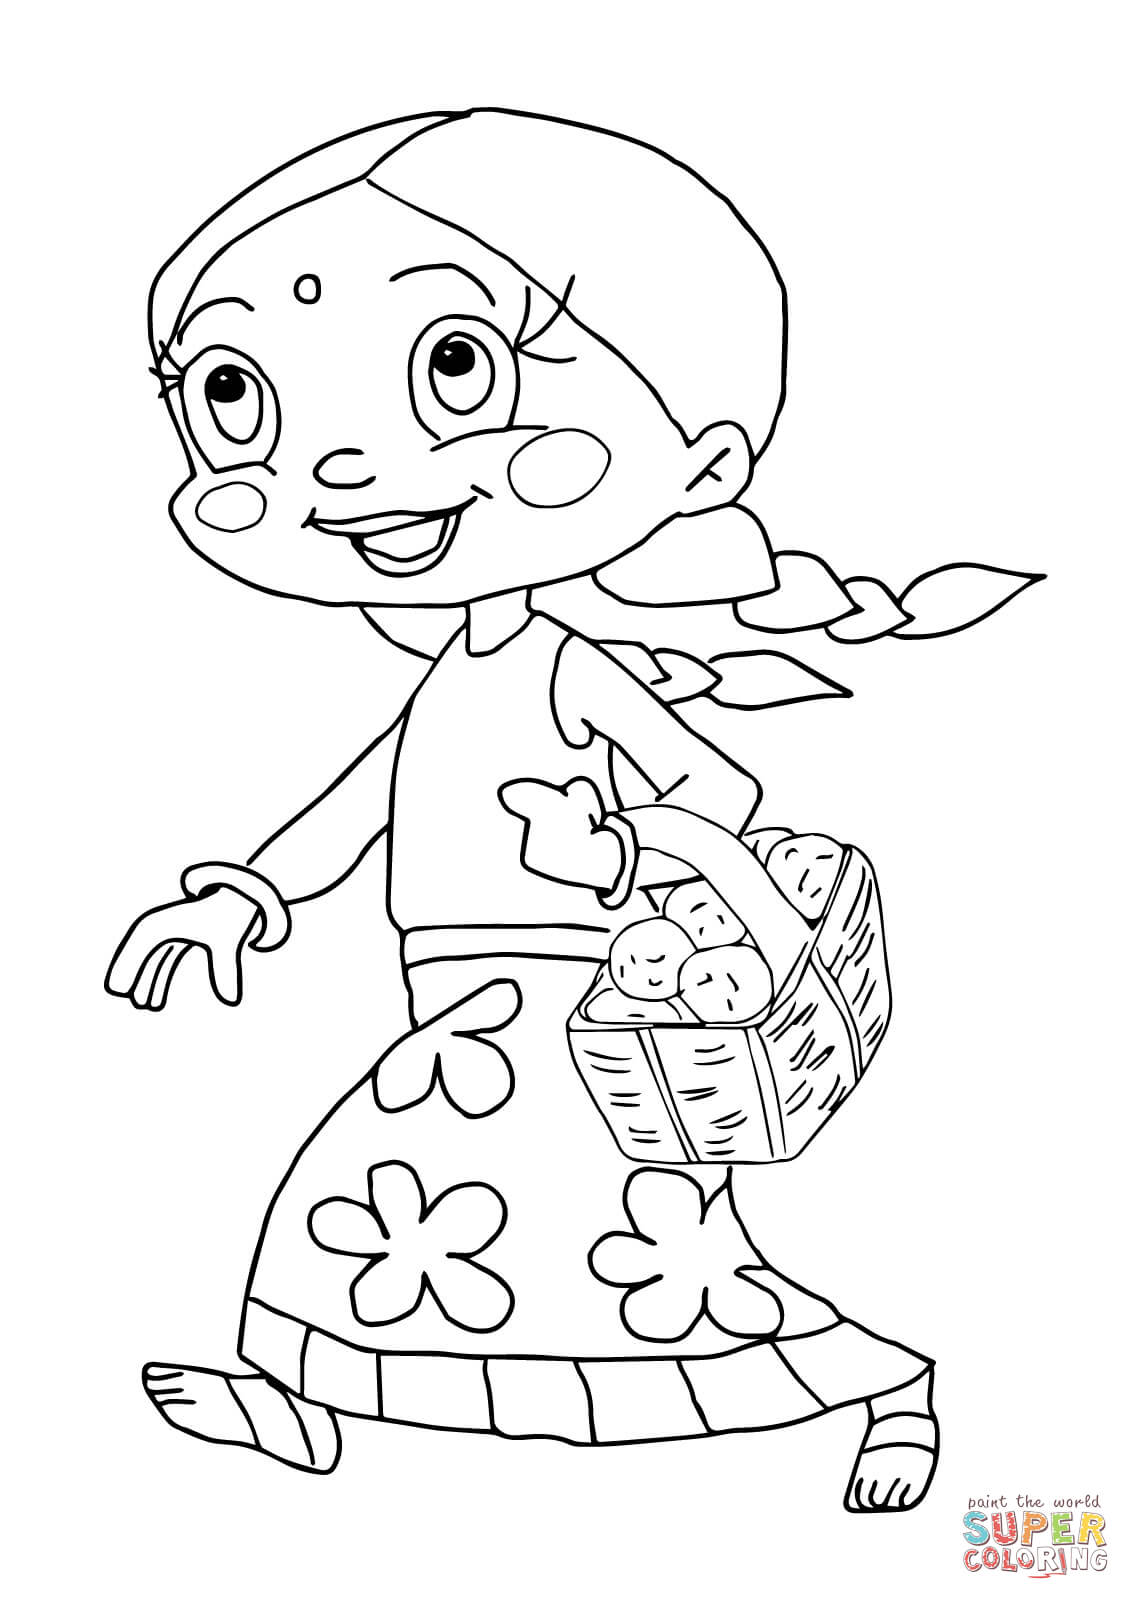 Chutki From Chhota Bheem Coloring Page | Free Printable Coloring Pages -  Coloring Home